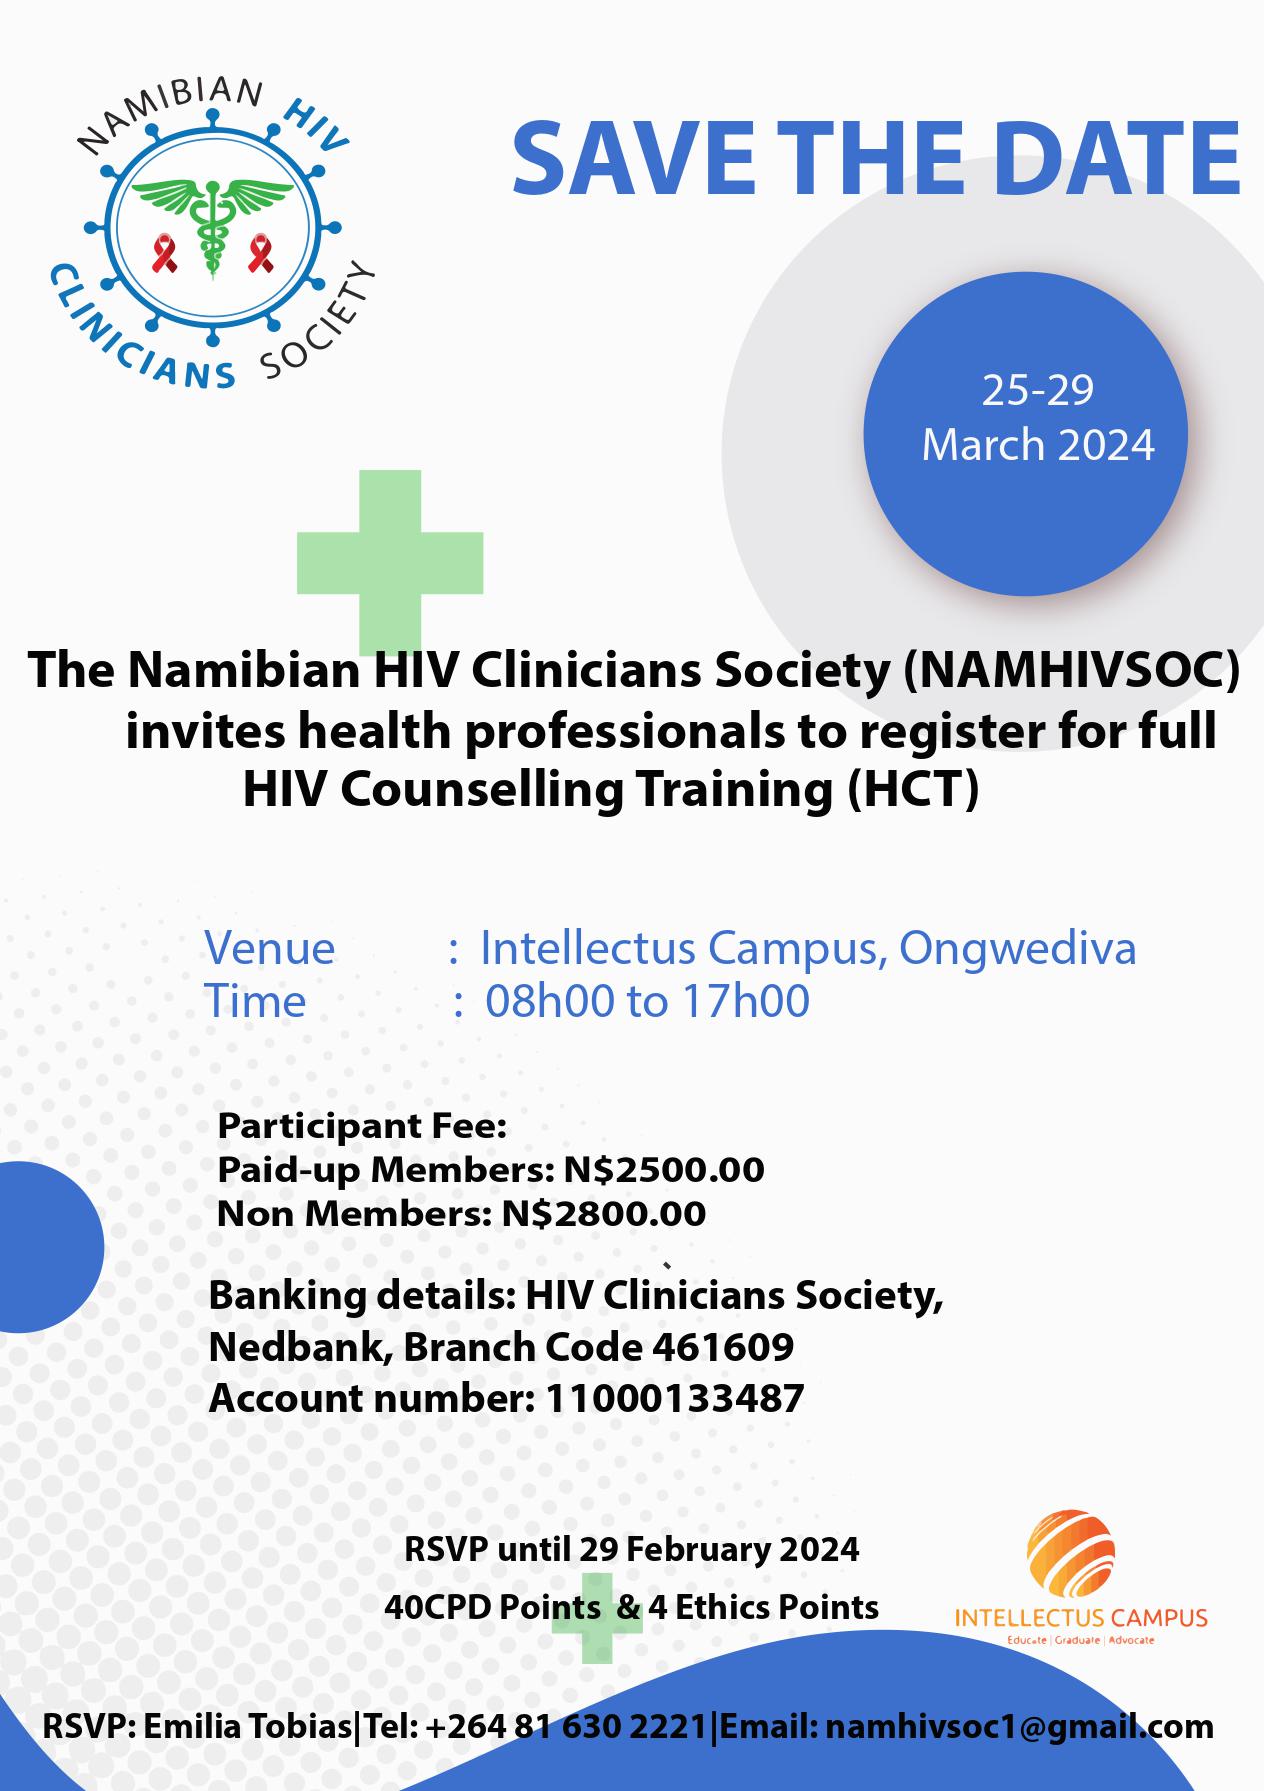 2024 Registration for HIV Counselling Training (HCT) Namibian HIV